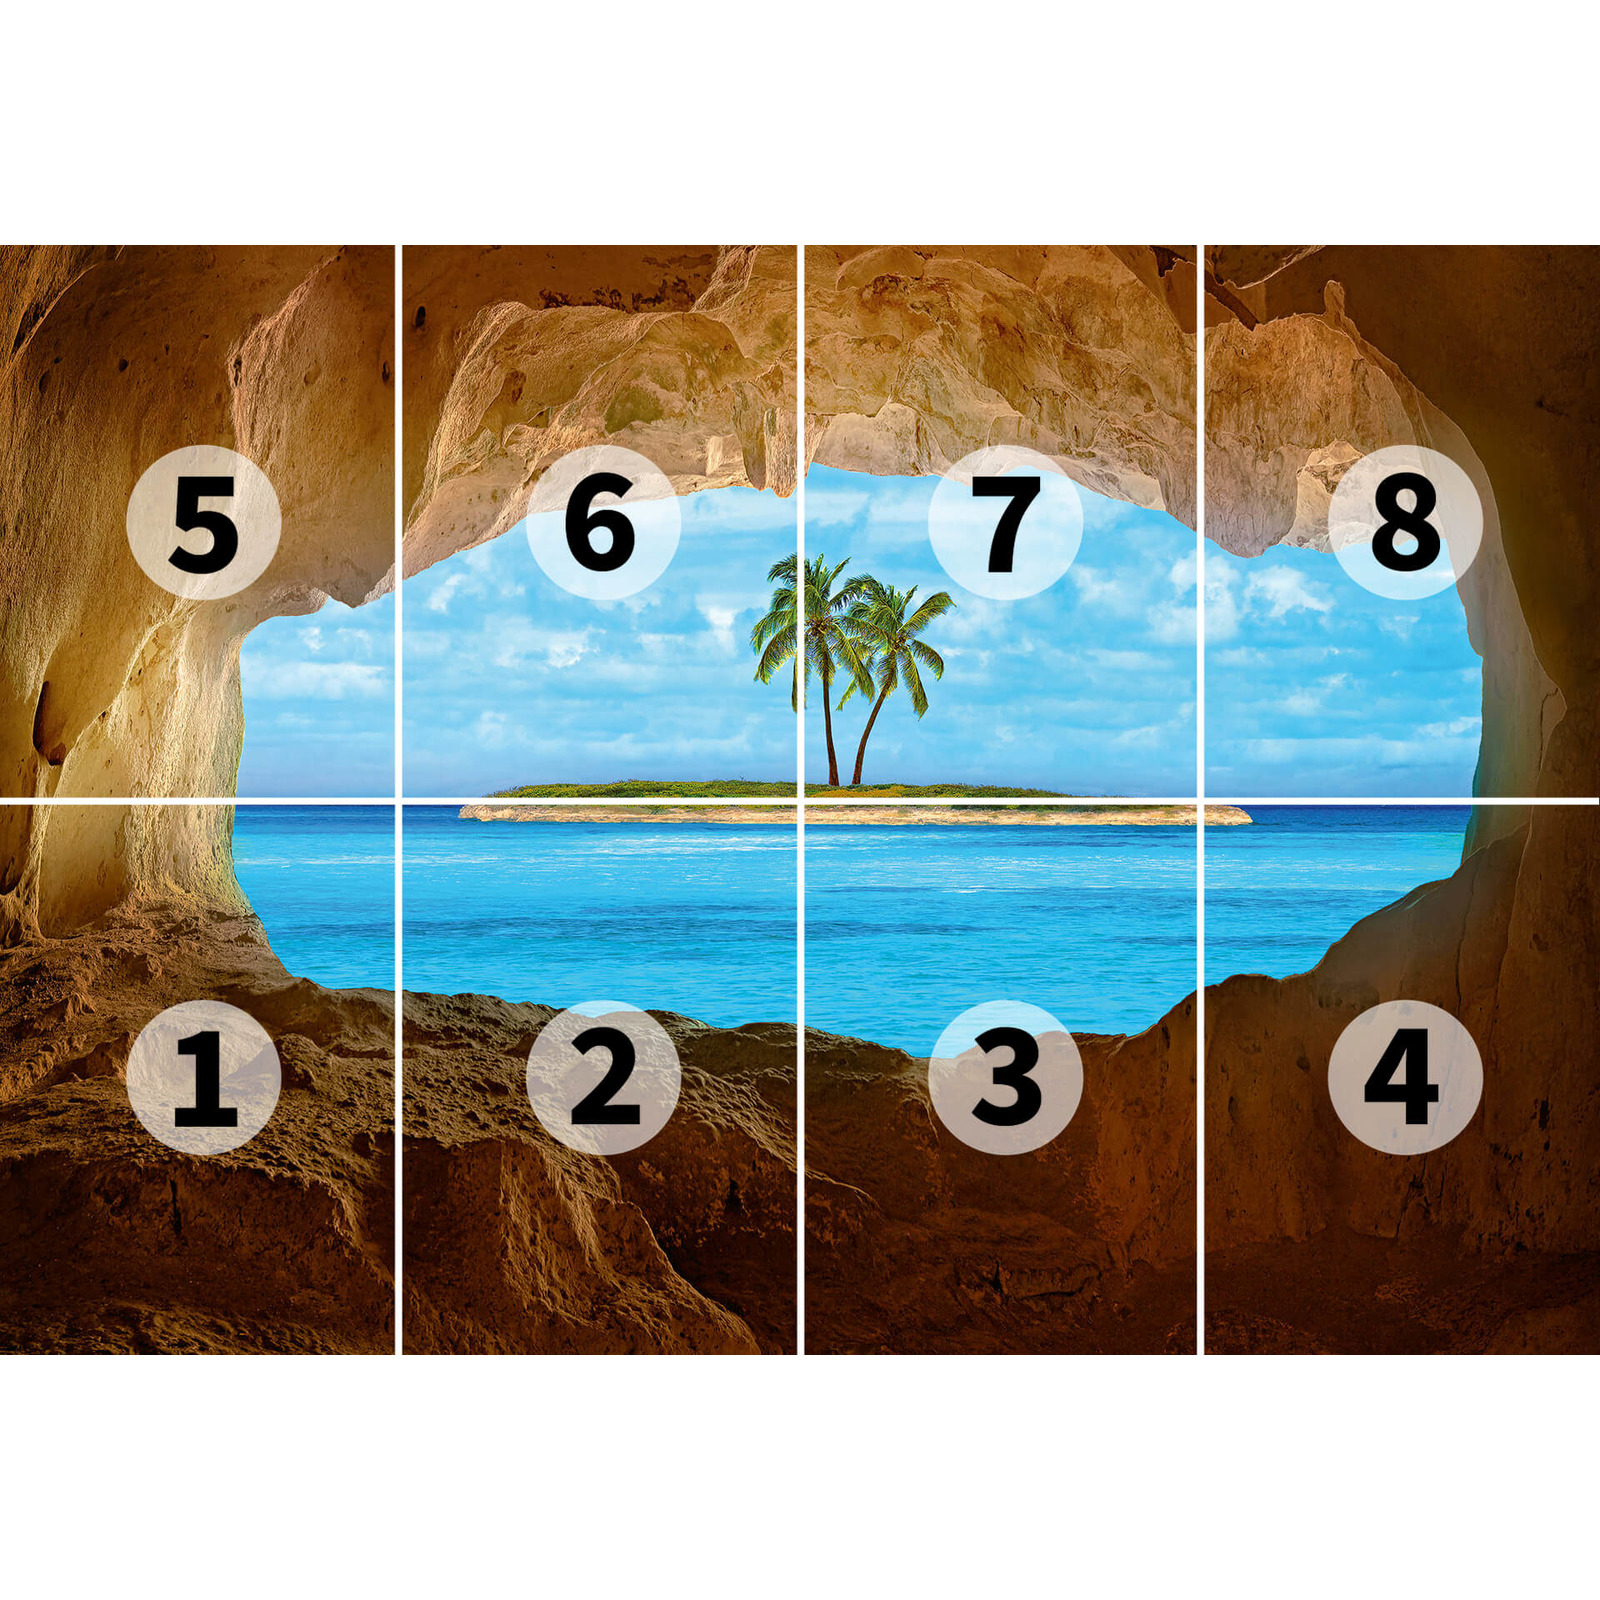             South Seas mural natural stone cave with sea view
        